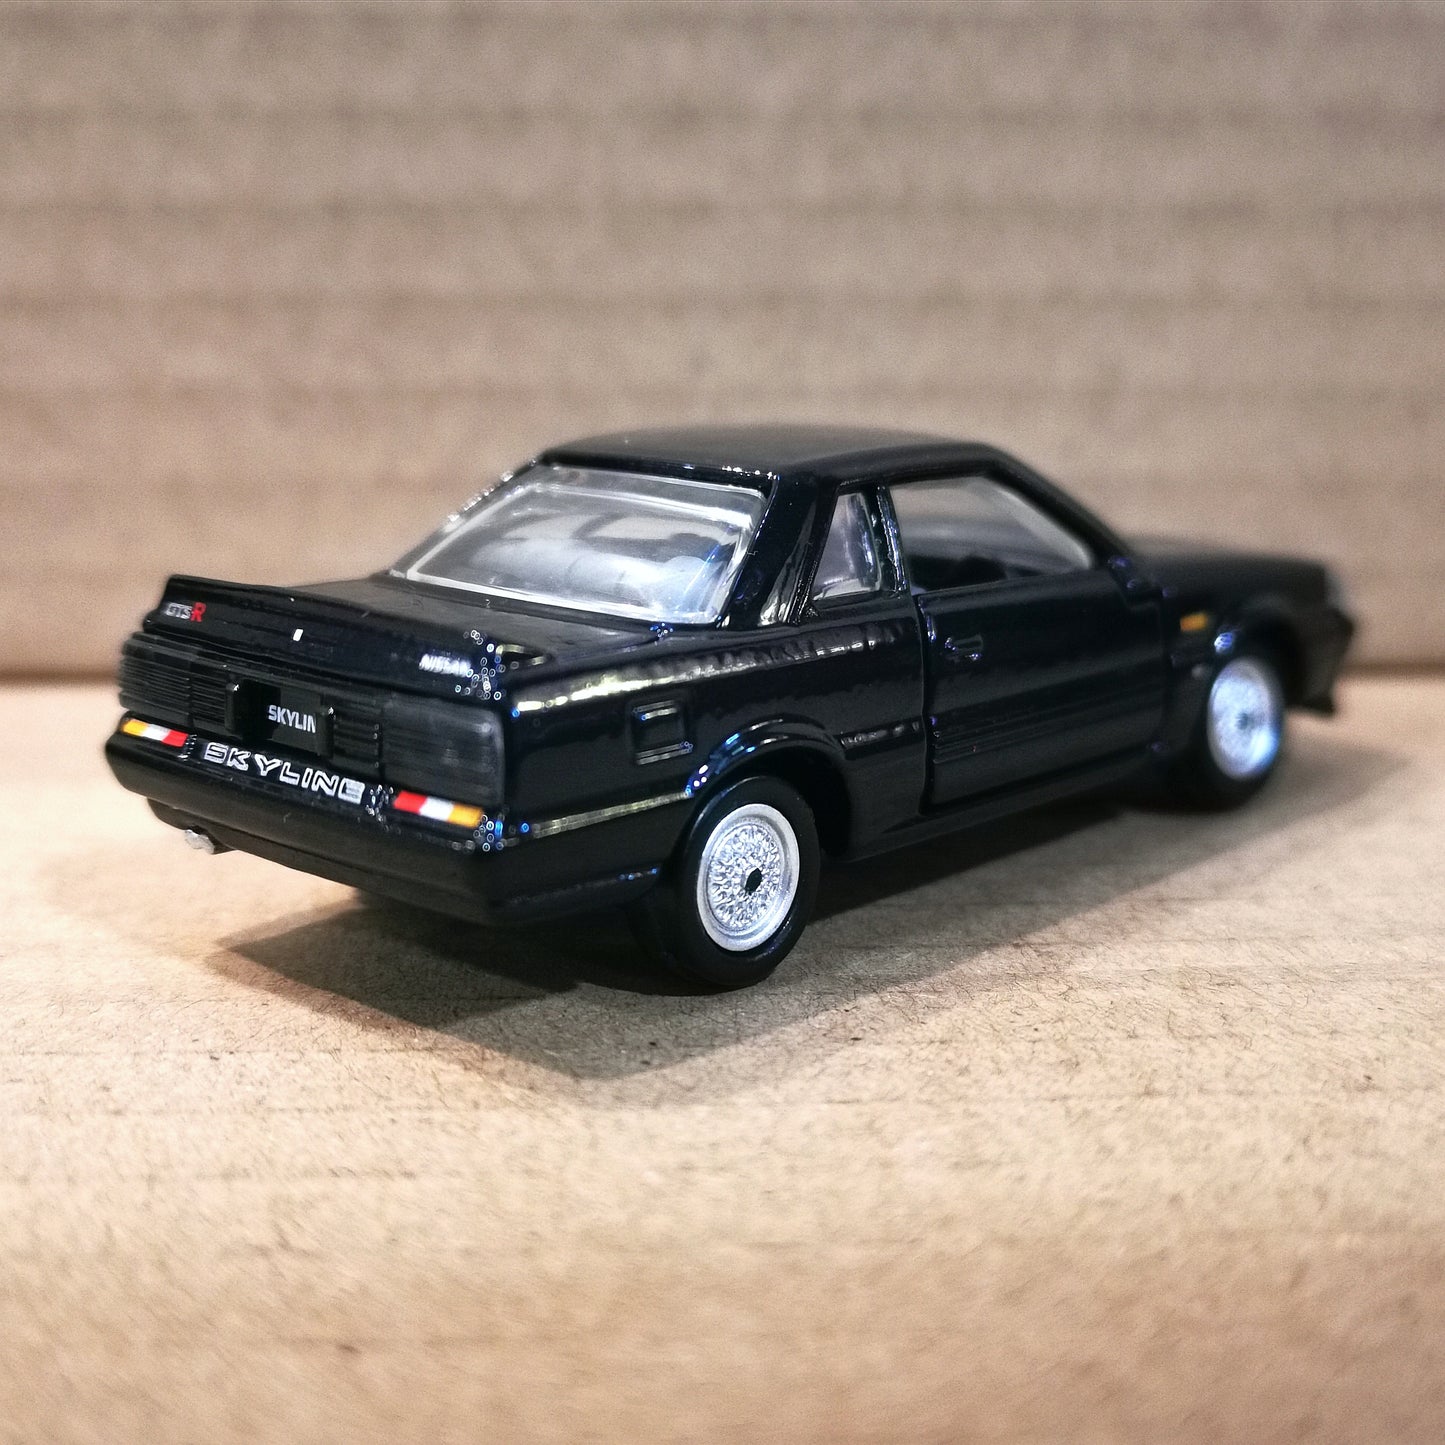 TOMICA PREMIUM 04 Nissan Skyline GTS-R 1:61 SCALE NEW IN Box